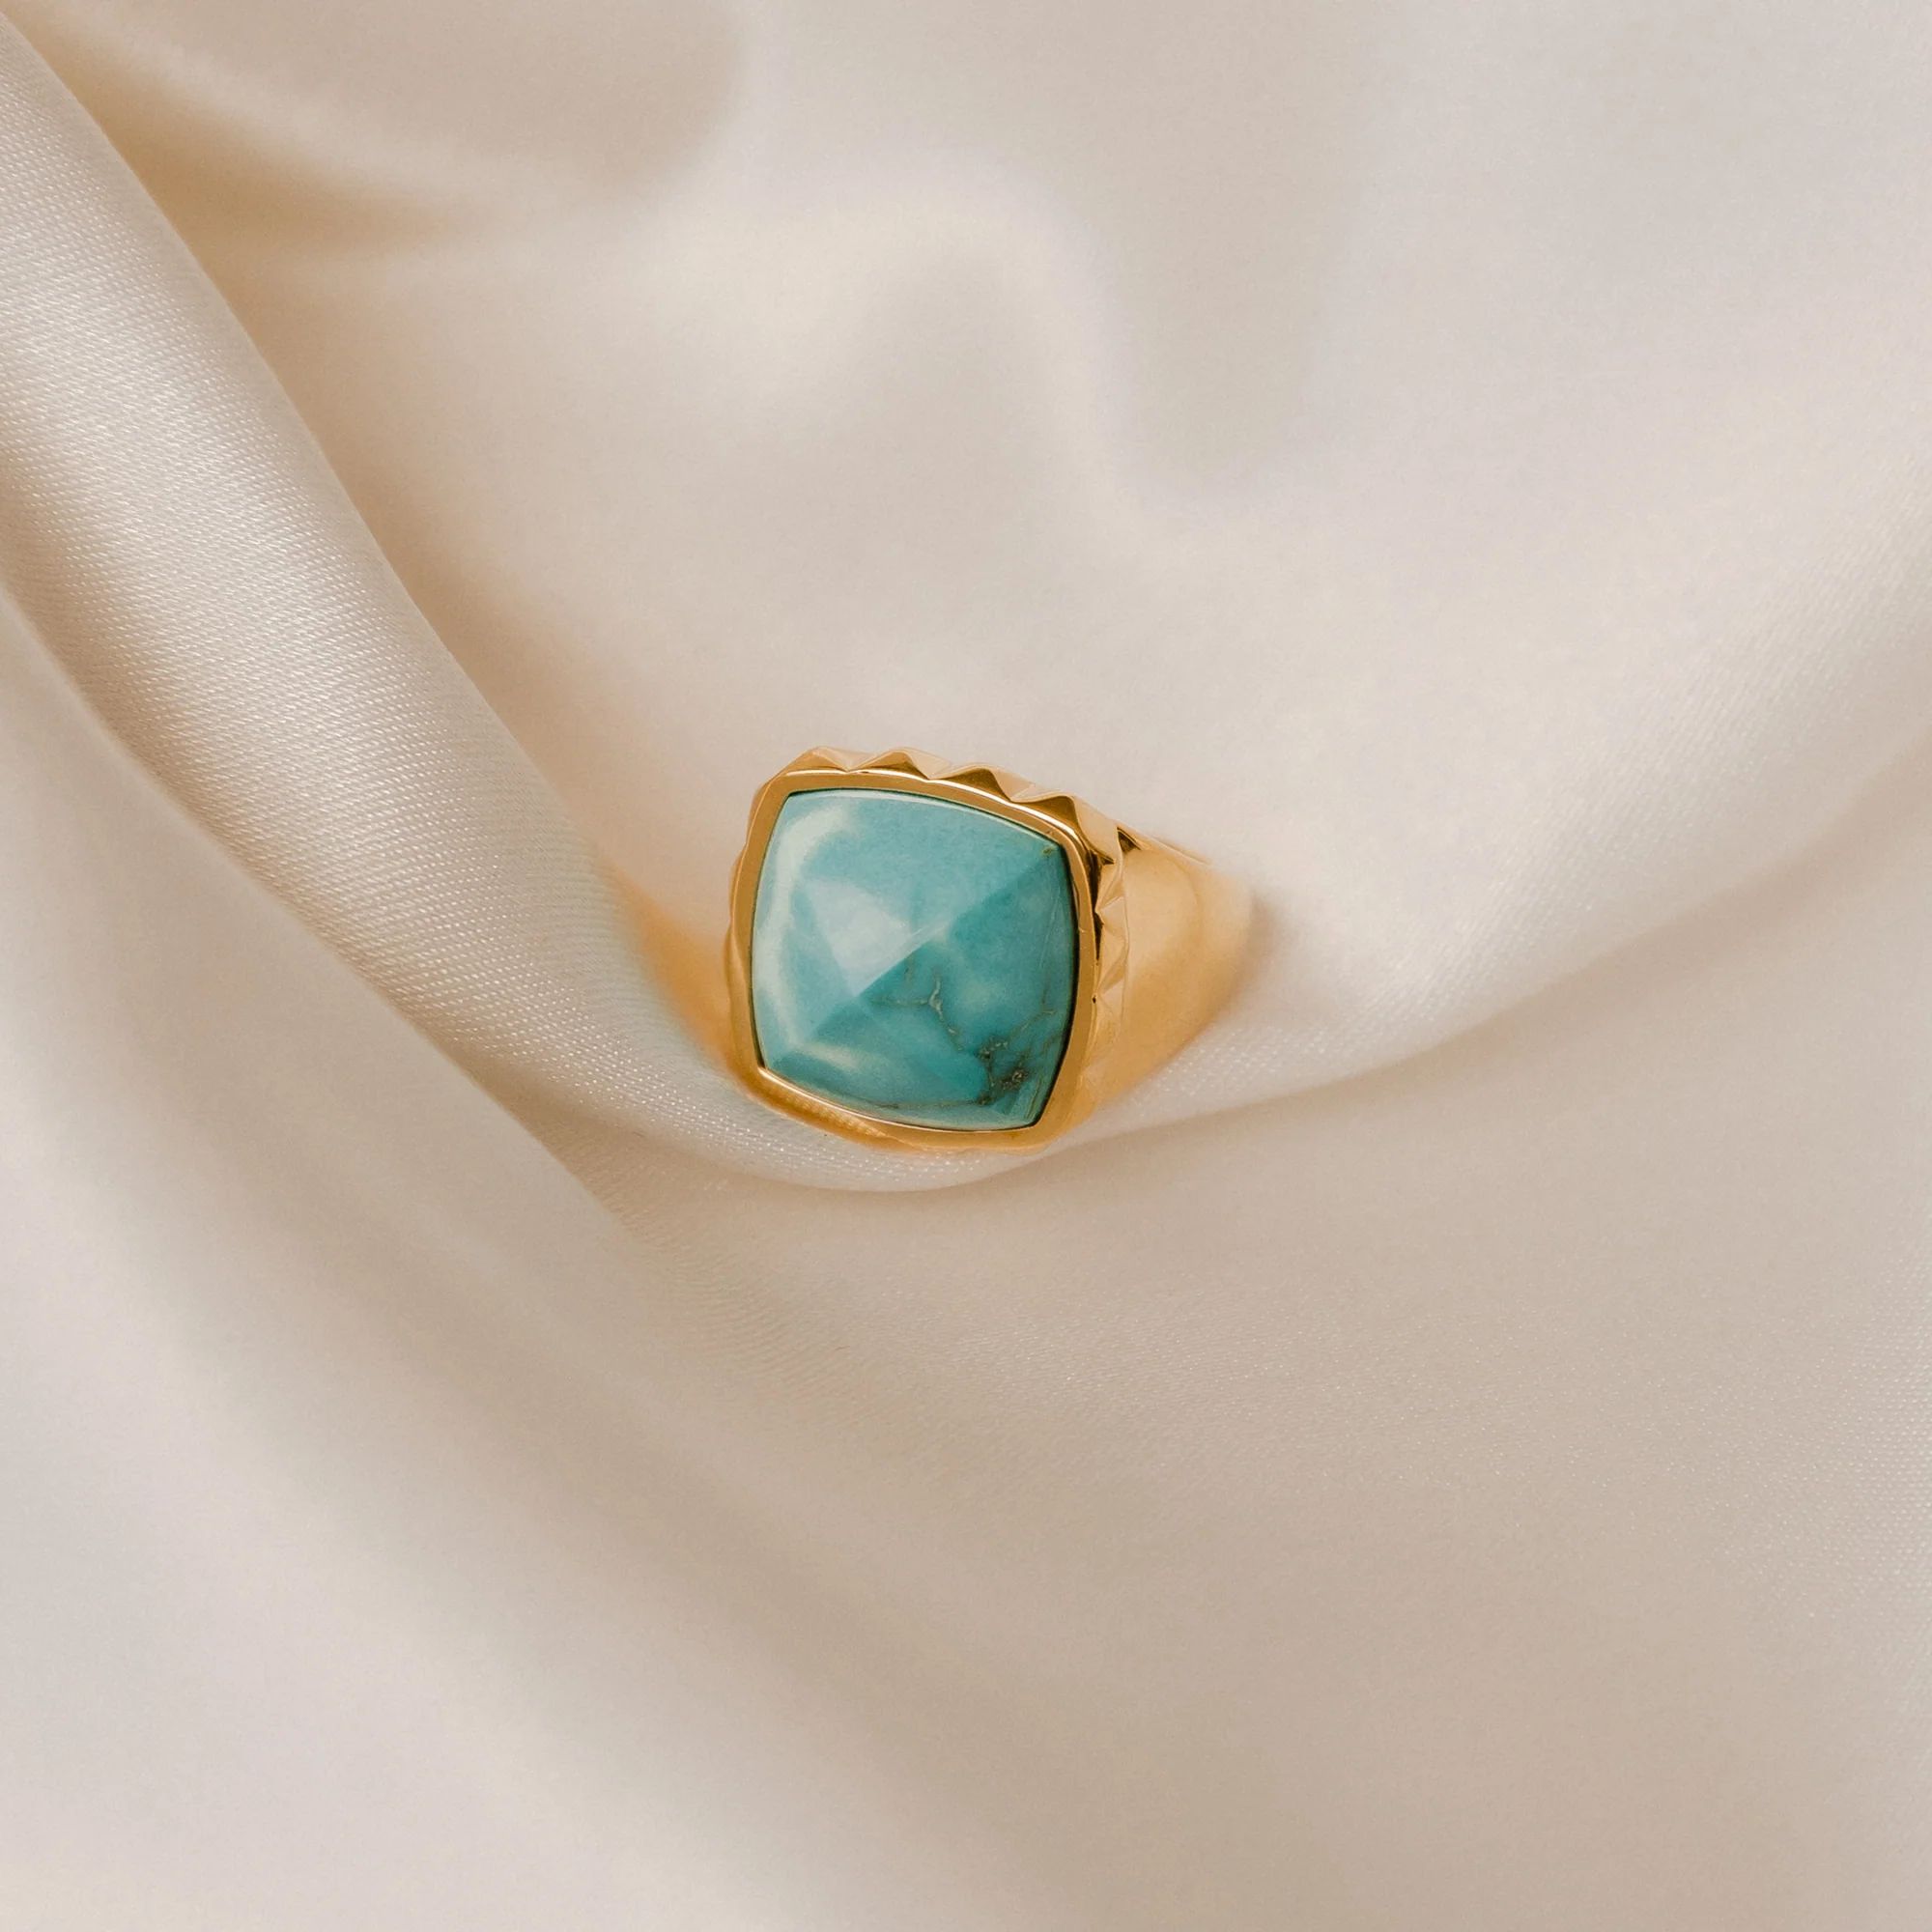 Turquoise Pyramid Ring | Erin Fader Jewelry Design